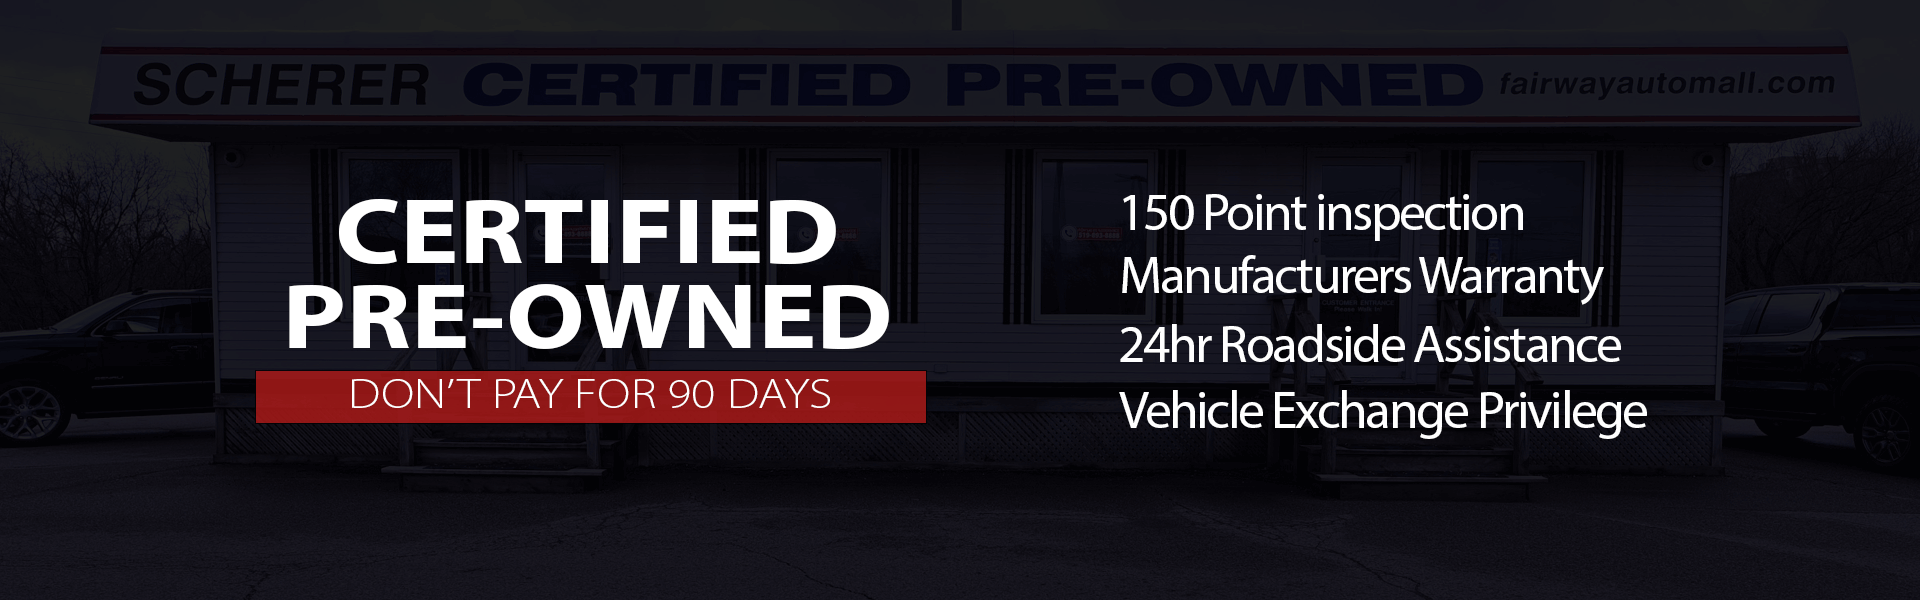 GM Certified Pre-Owned Benefits.